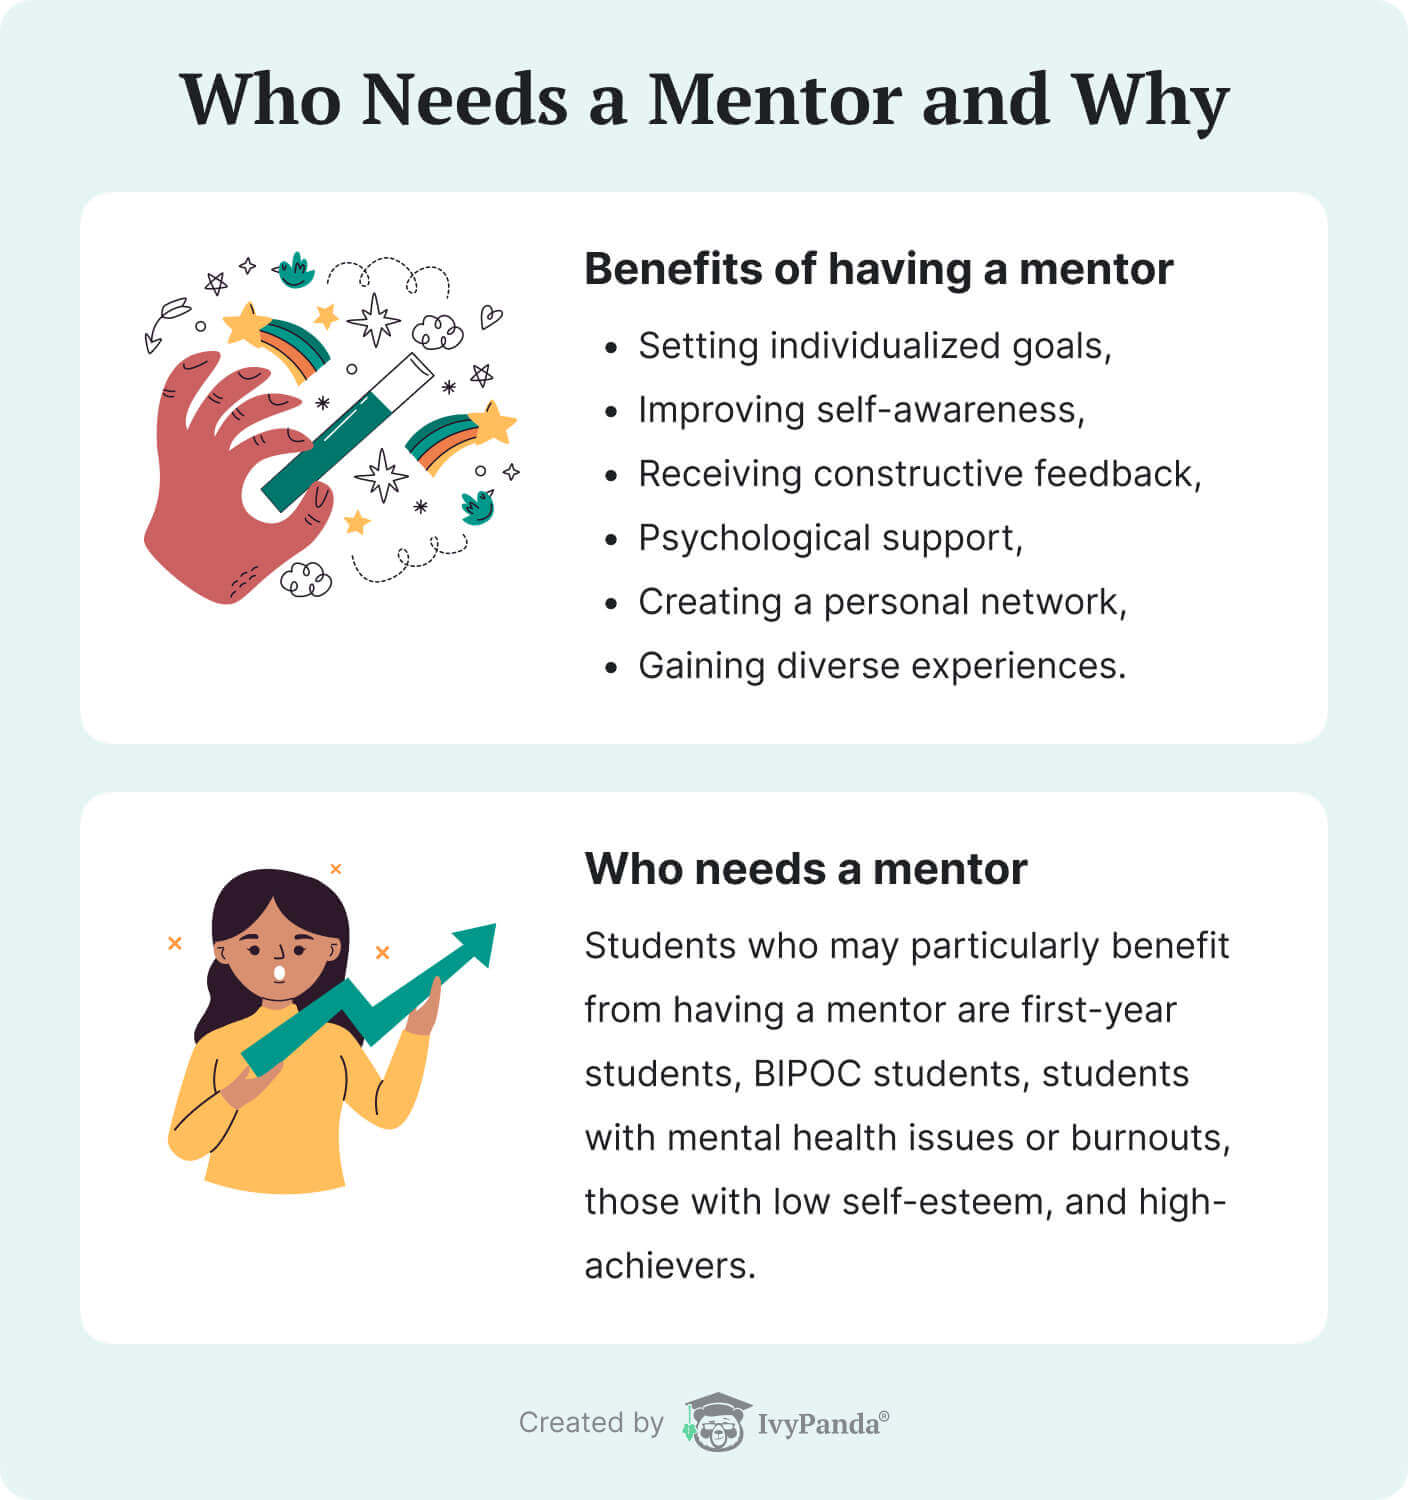 The picture lists the key benefits of having a mentor as a student.